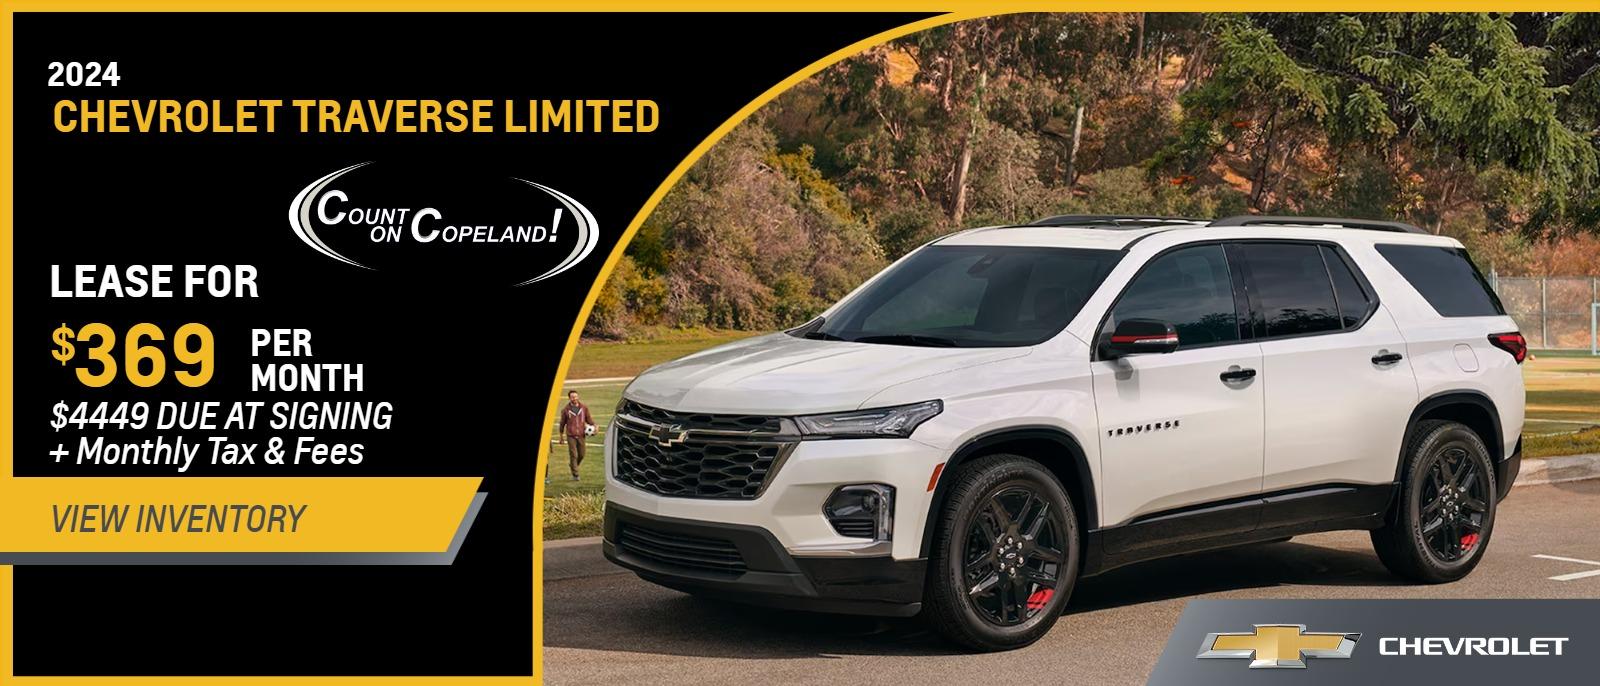 2023 Traverse FWD LT Cloth from $369 Per Month